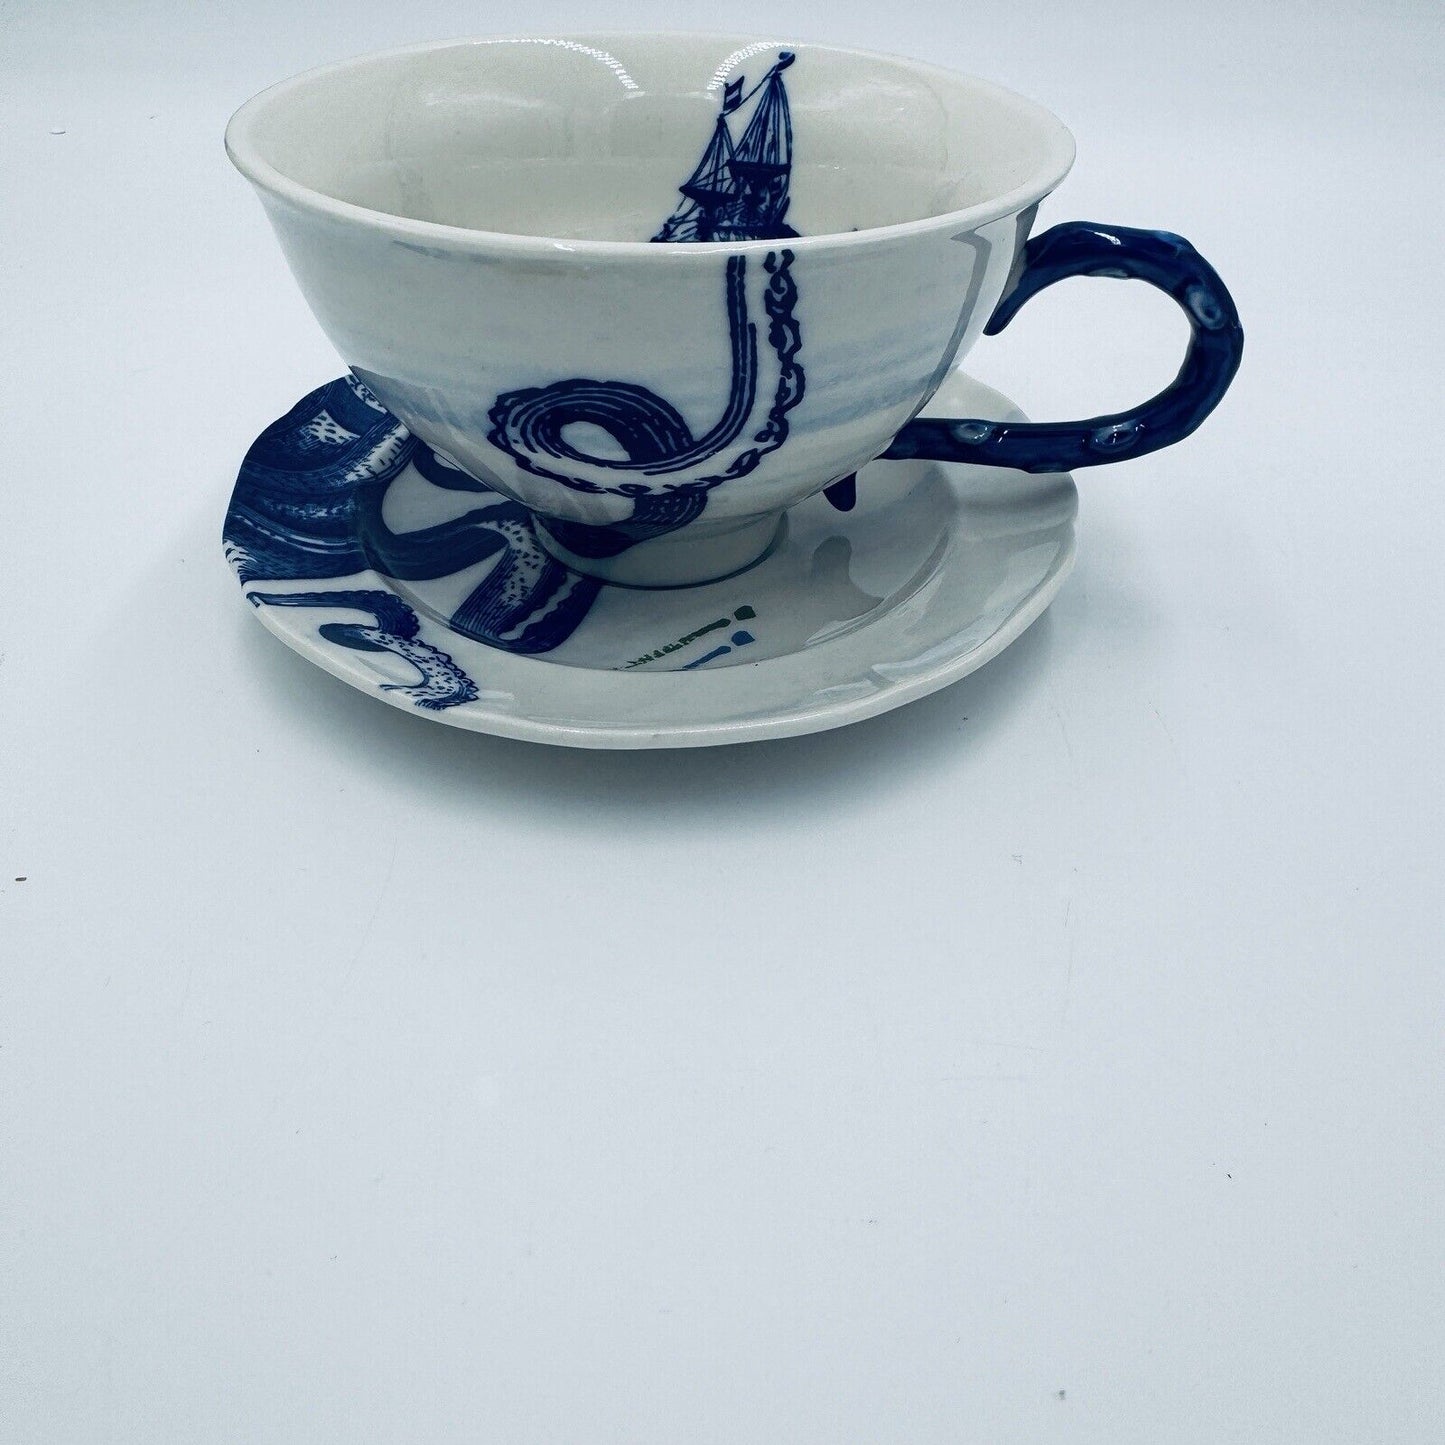 Anthropologie From the Deep Octopus Large Cup and Saucer Set Galleon Nautical